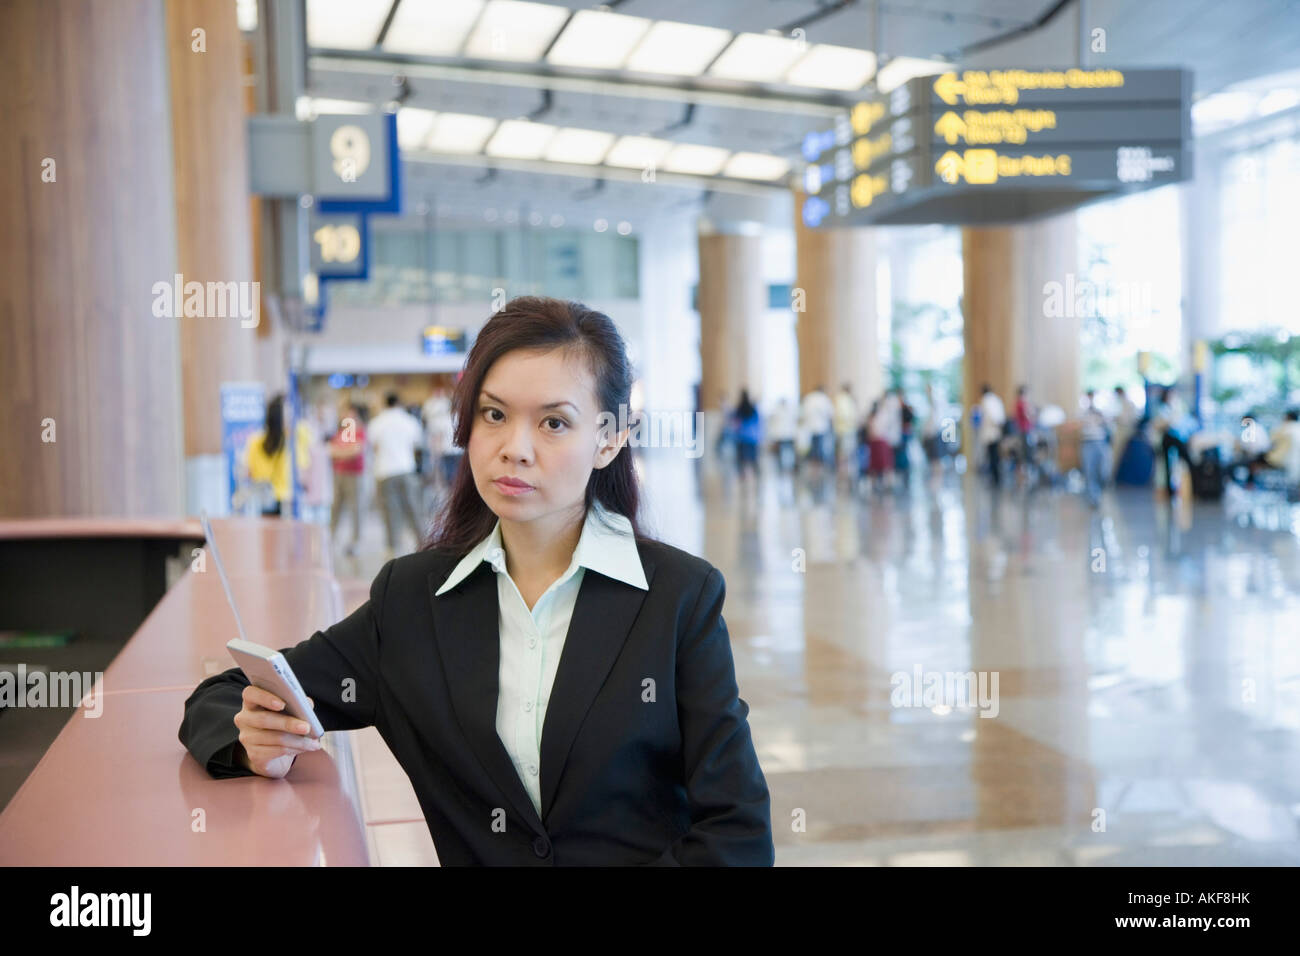 Portrait of a businesswoman using a hand held device at an airport Stock Photo